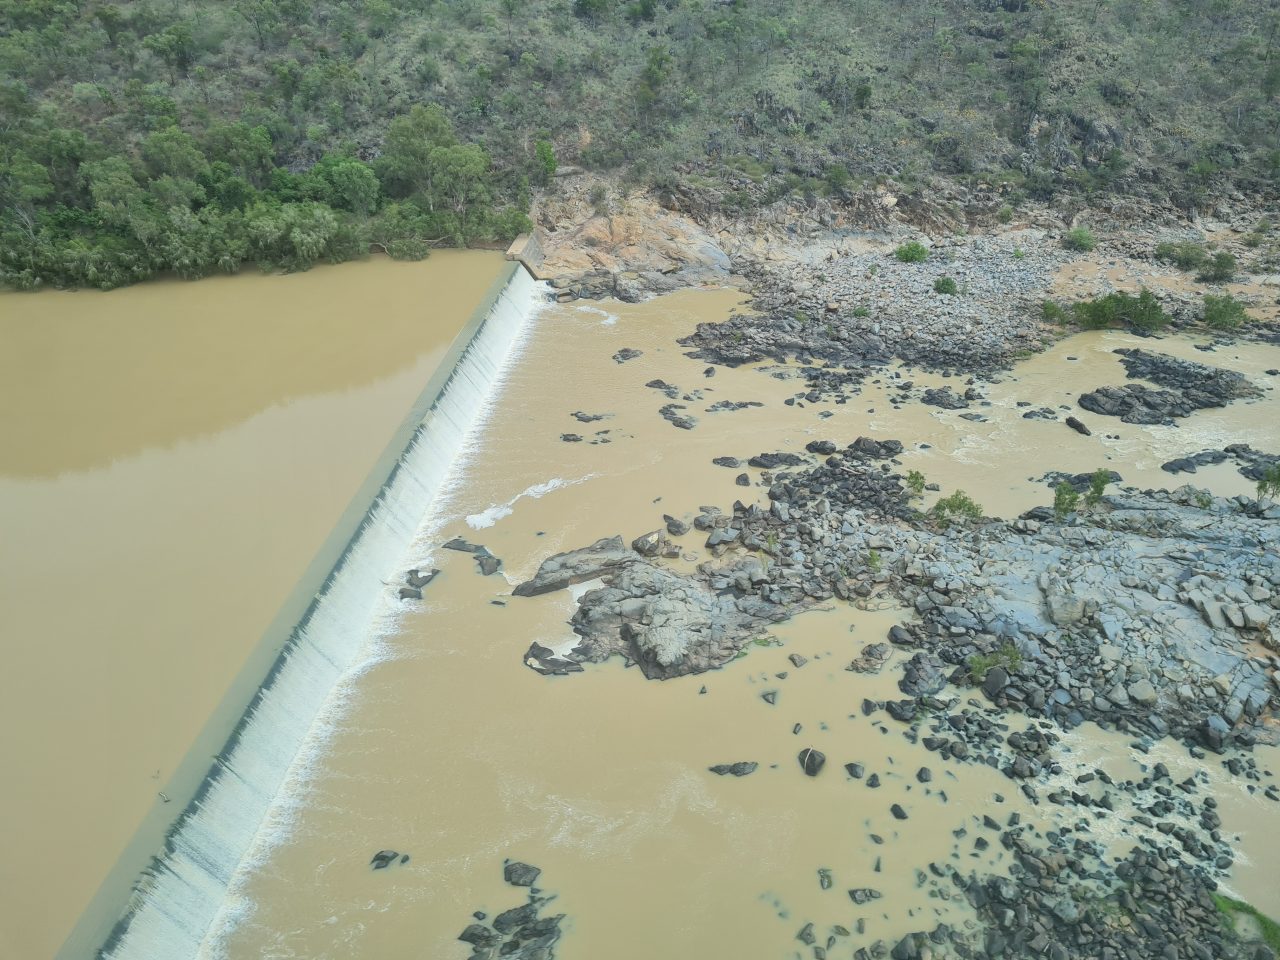 Aerial photo of  weir running across river, flowing with yellow-brown water and exposed rocks on the lower side of weir